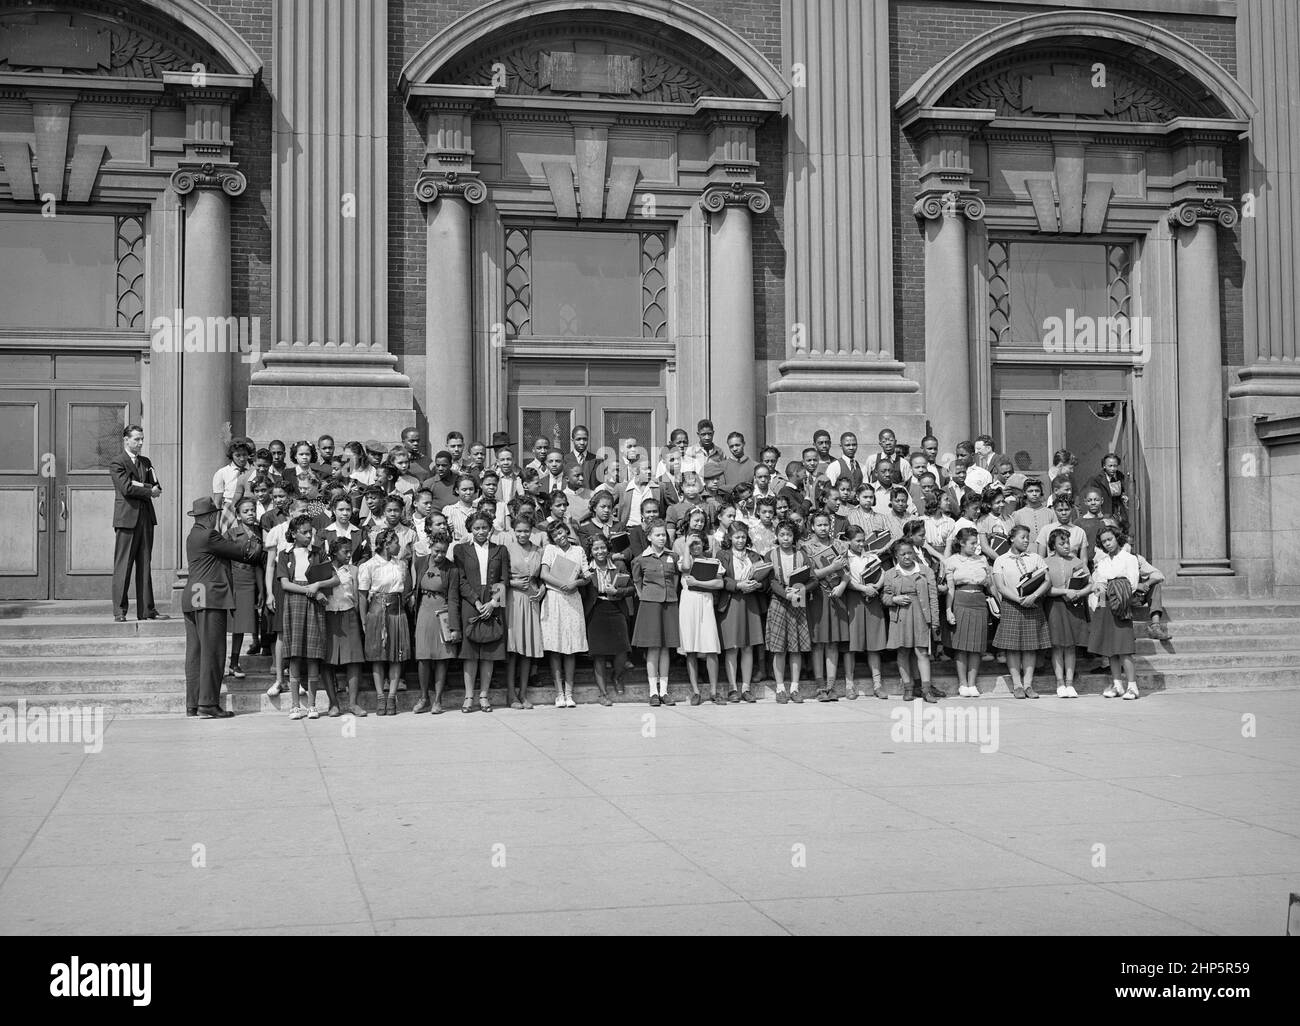 High School graduating Class, Chicago, Illinois, USA, Russell Lee, U.S. Office of War Information/U.S. Farm Security Administration, April 1941 Stock Photo